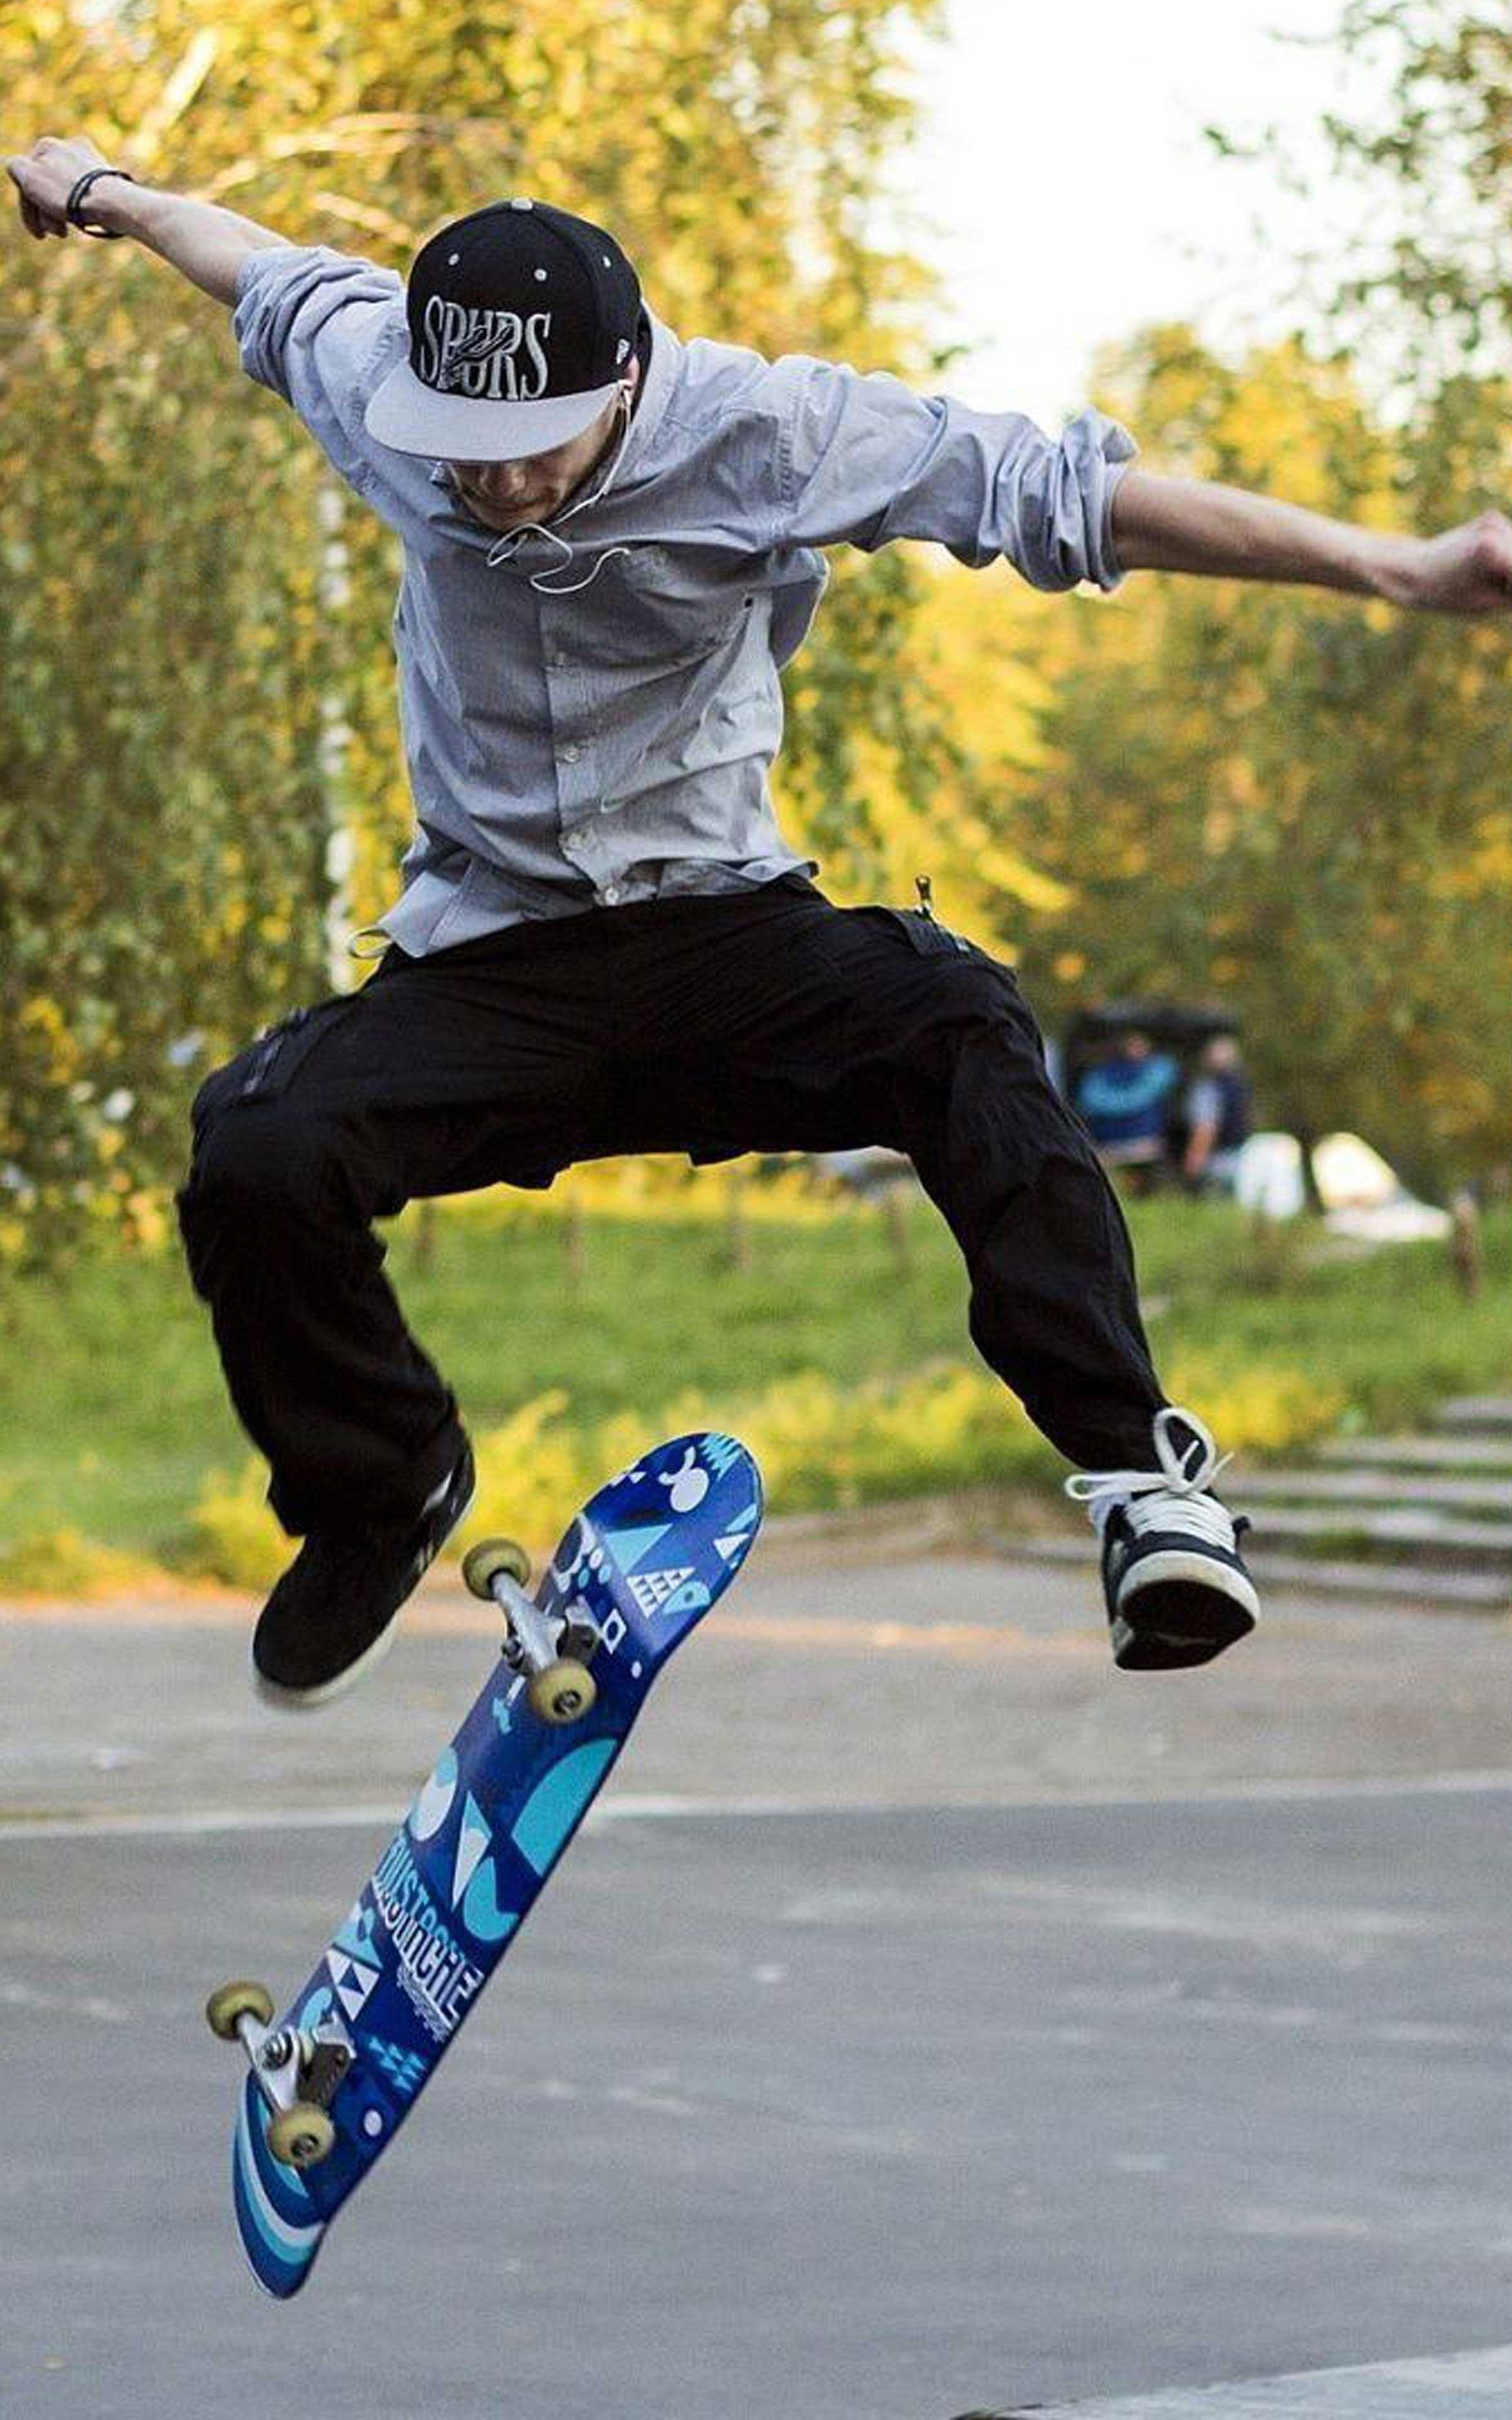 A skateboarder in the air doing a trick. - Skate